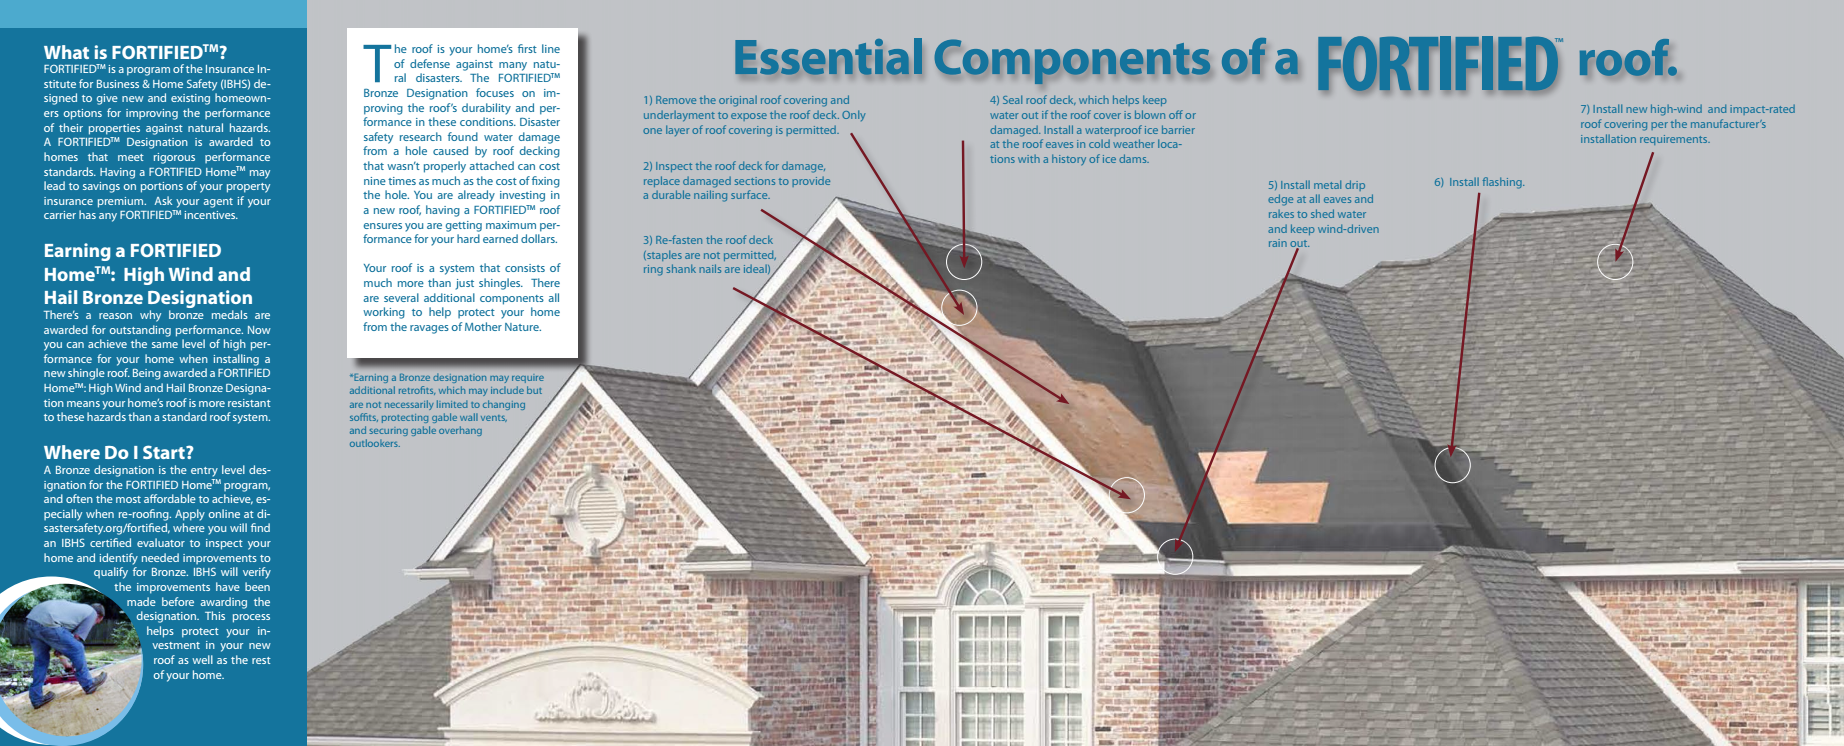 Essential Components of Fortified Roof